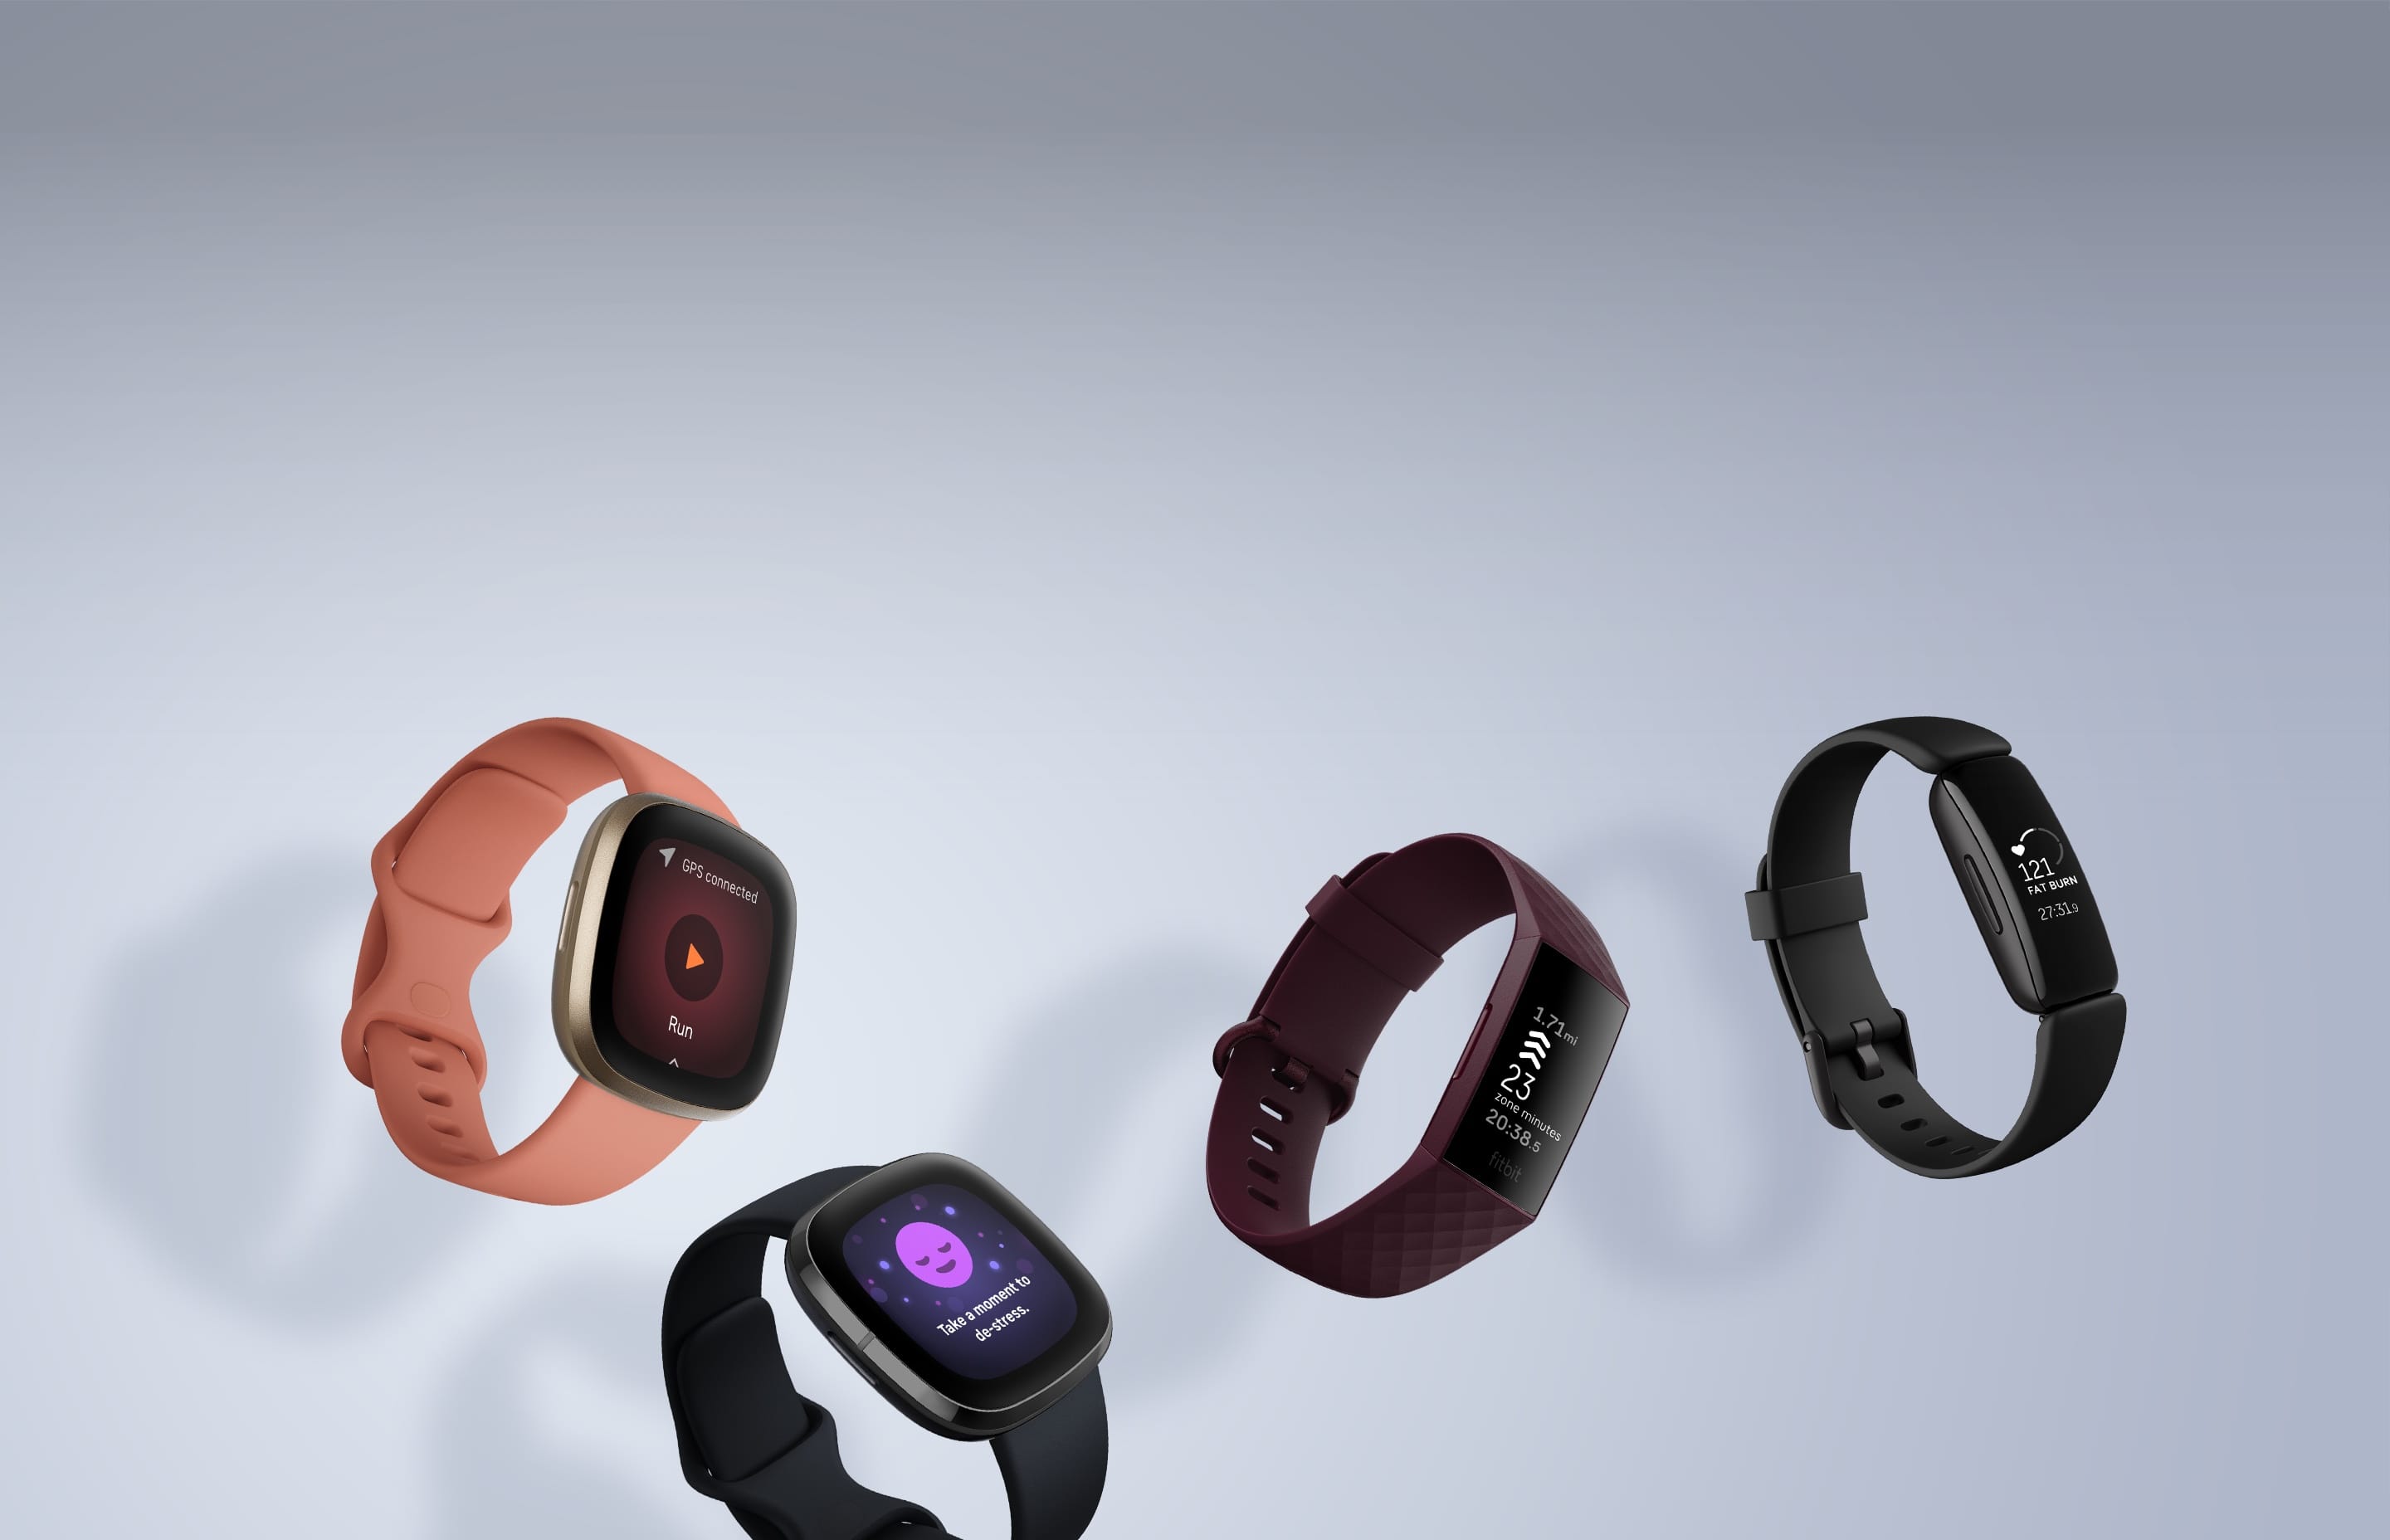 fitbit products